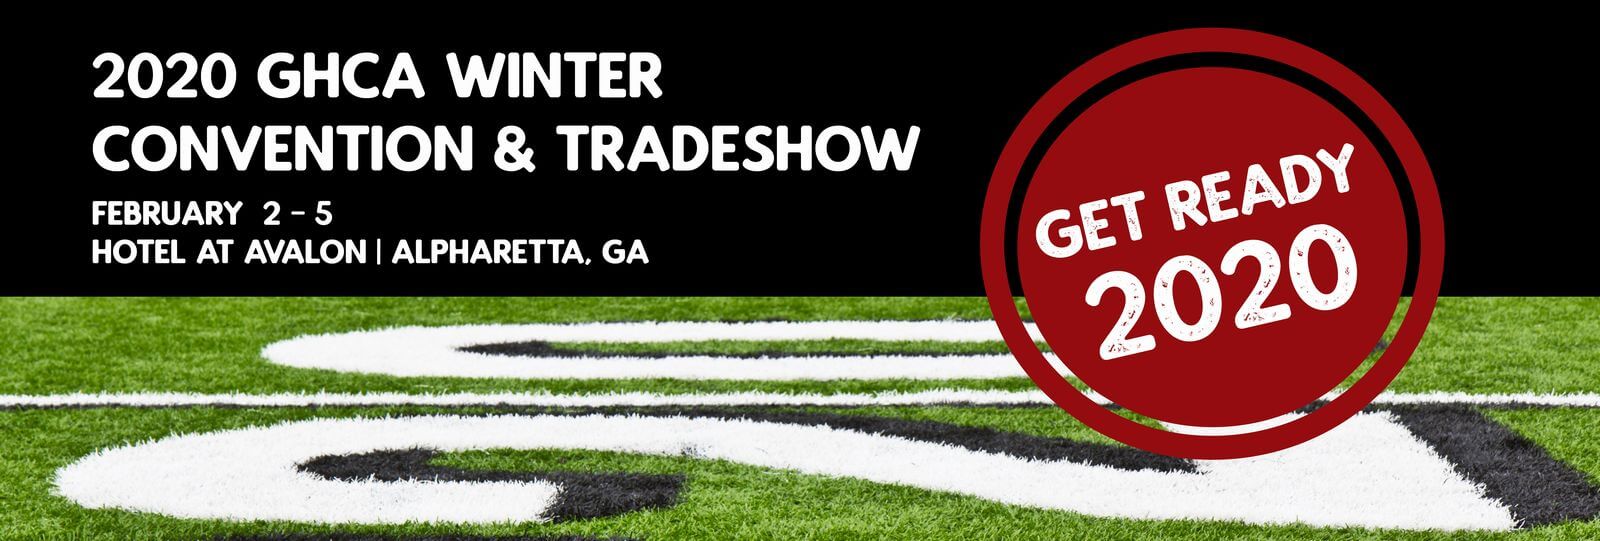 GHCA Winter Convention & Tradeshow Culture Change Network of